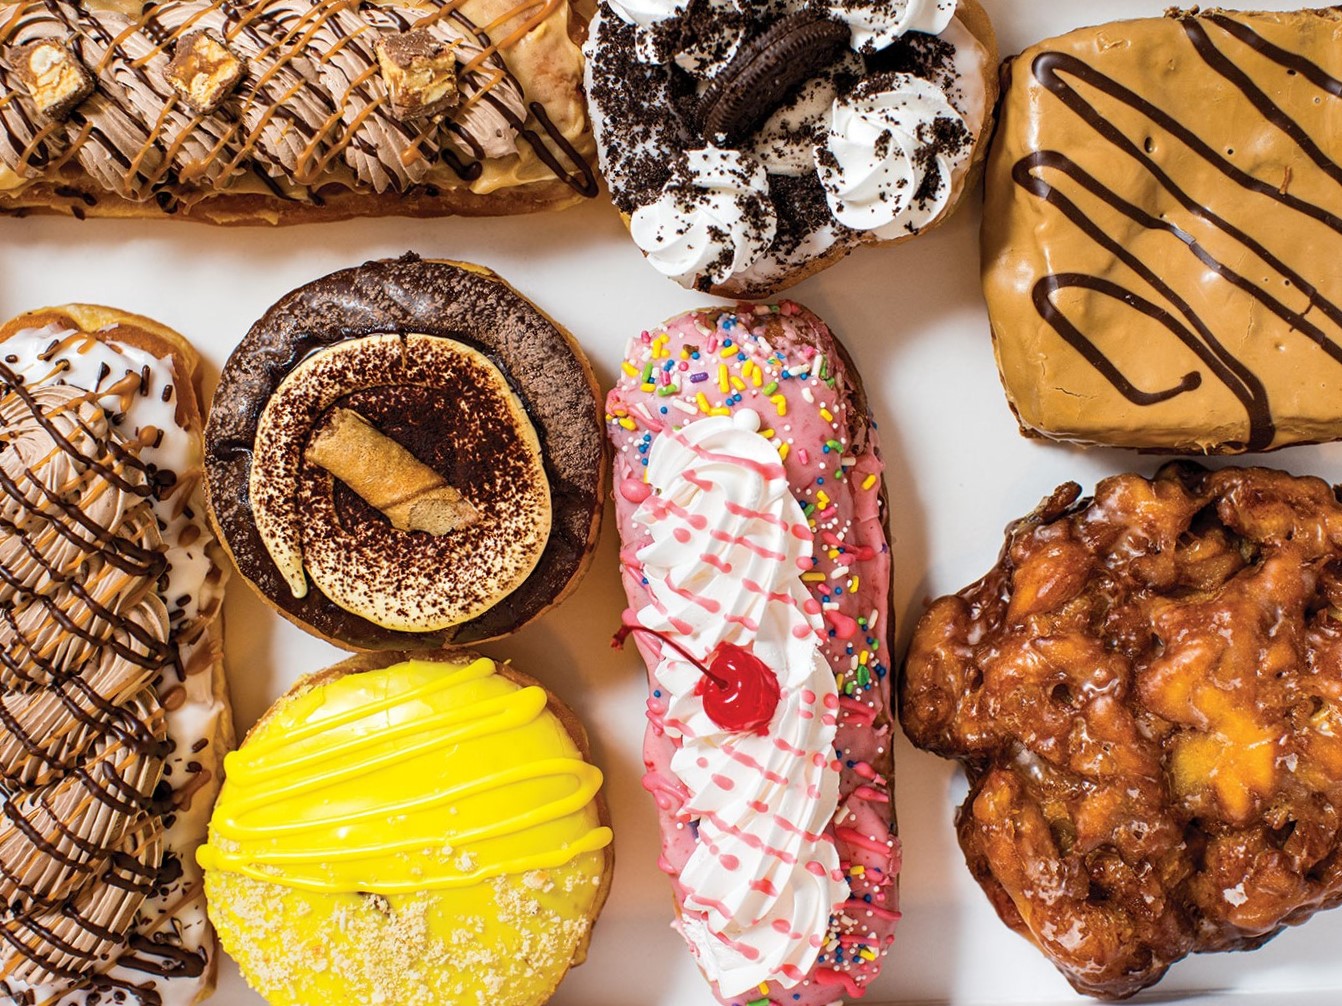 Uffa Donuts offers plenty of picks, ranging from cake donuts and specialty flavors to fritters and cronunts.